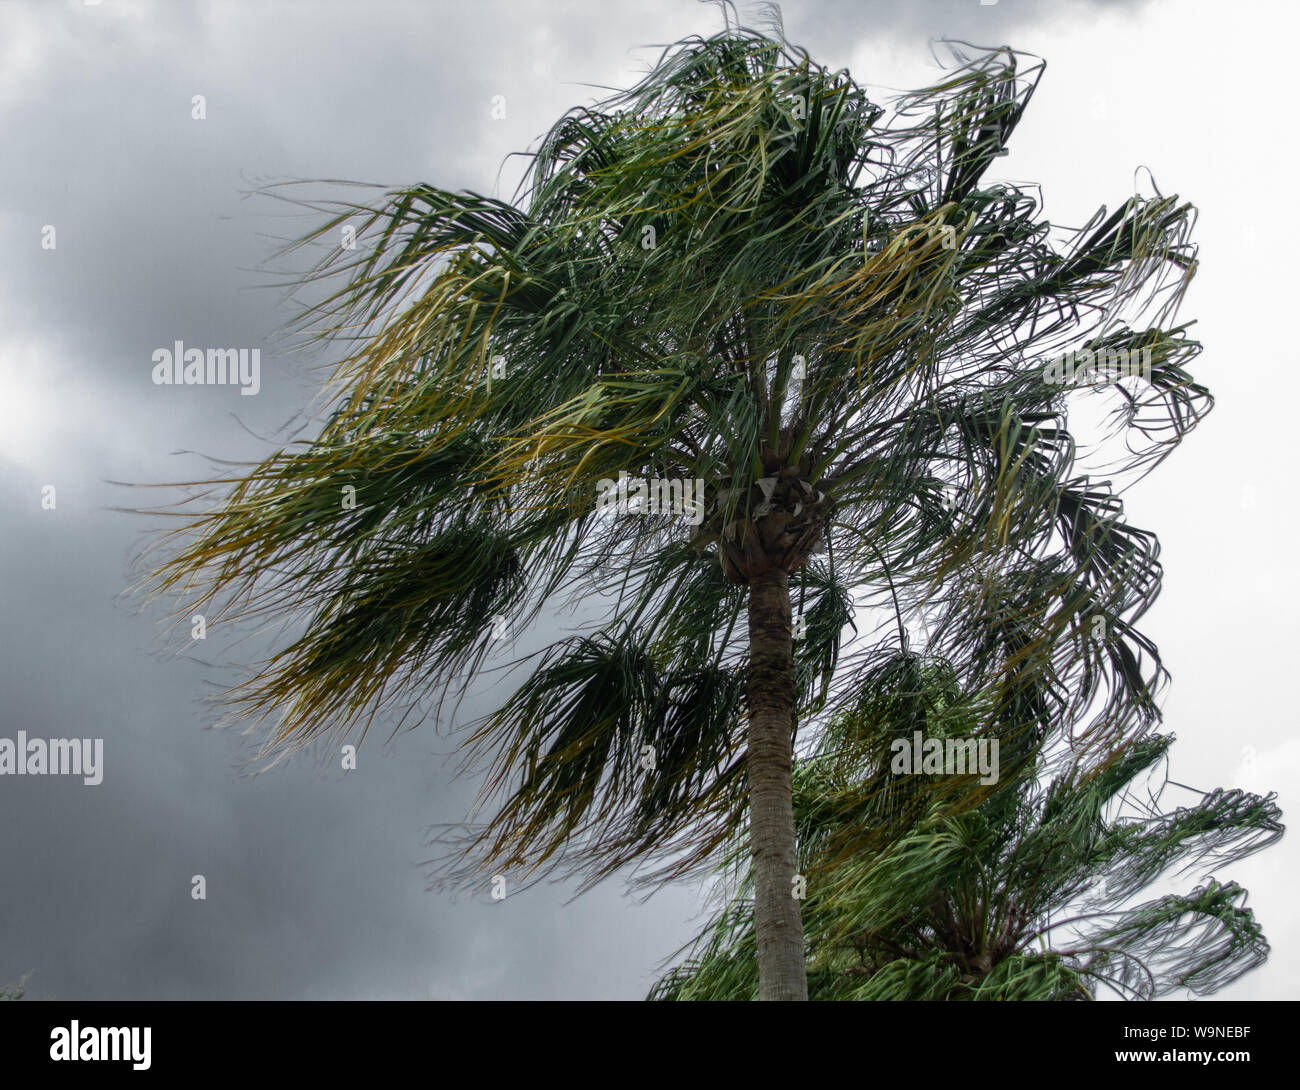 Palm trees blowing in the winds of a thunder storm. Stock Photo